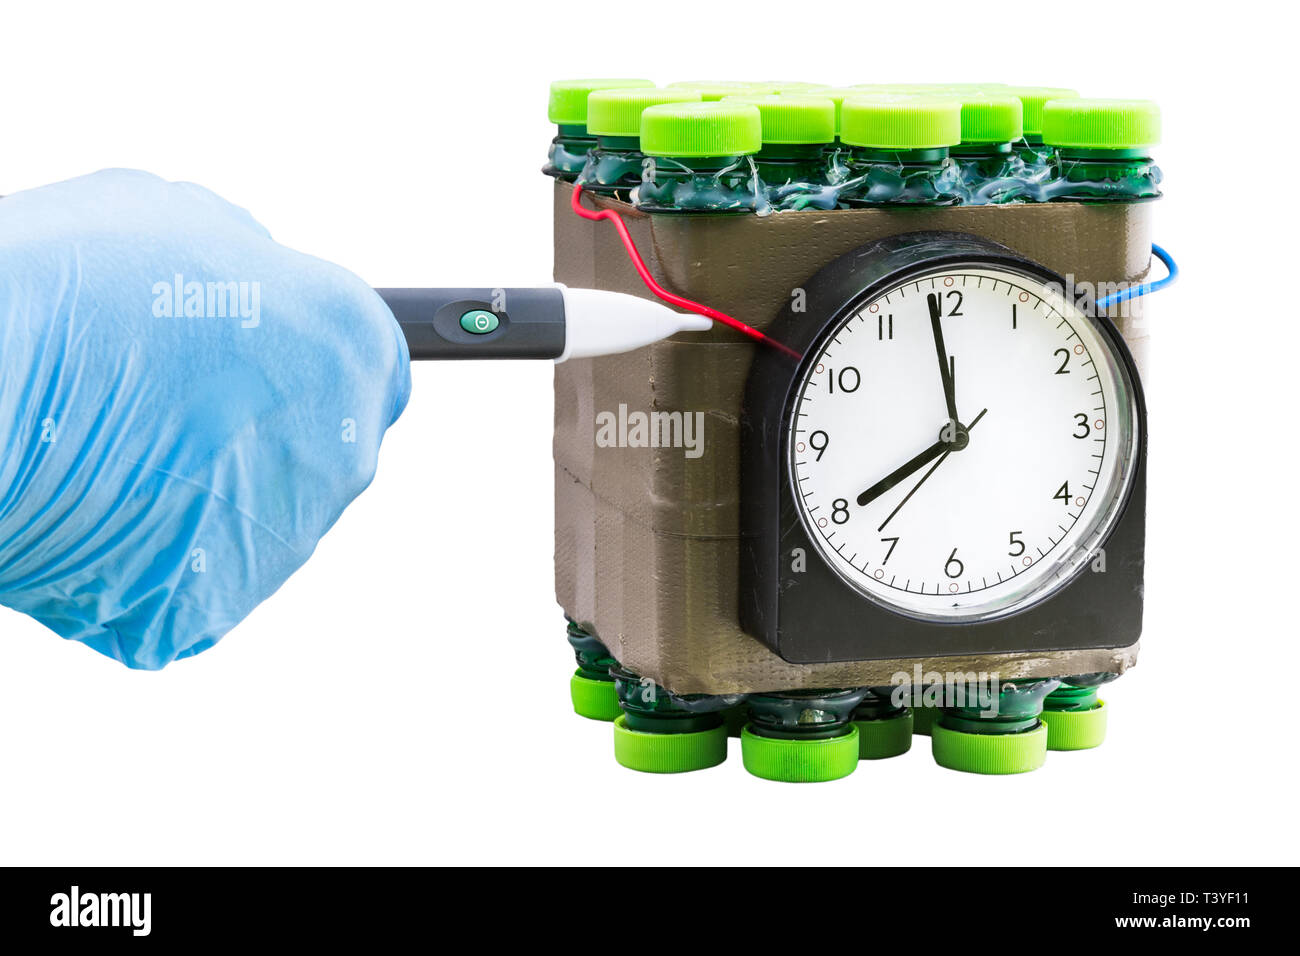 Time bomb disposal expert.Dummy weapon. Human hand in blue glove holding wireless tester. Dangerous explosive device deactivation. Terrorism, violence. Stock Photo